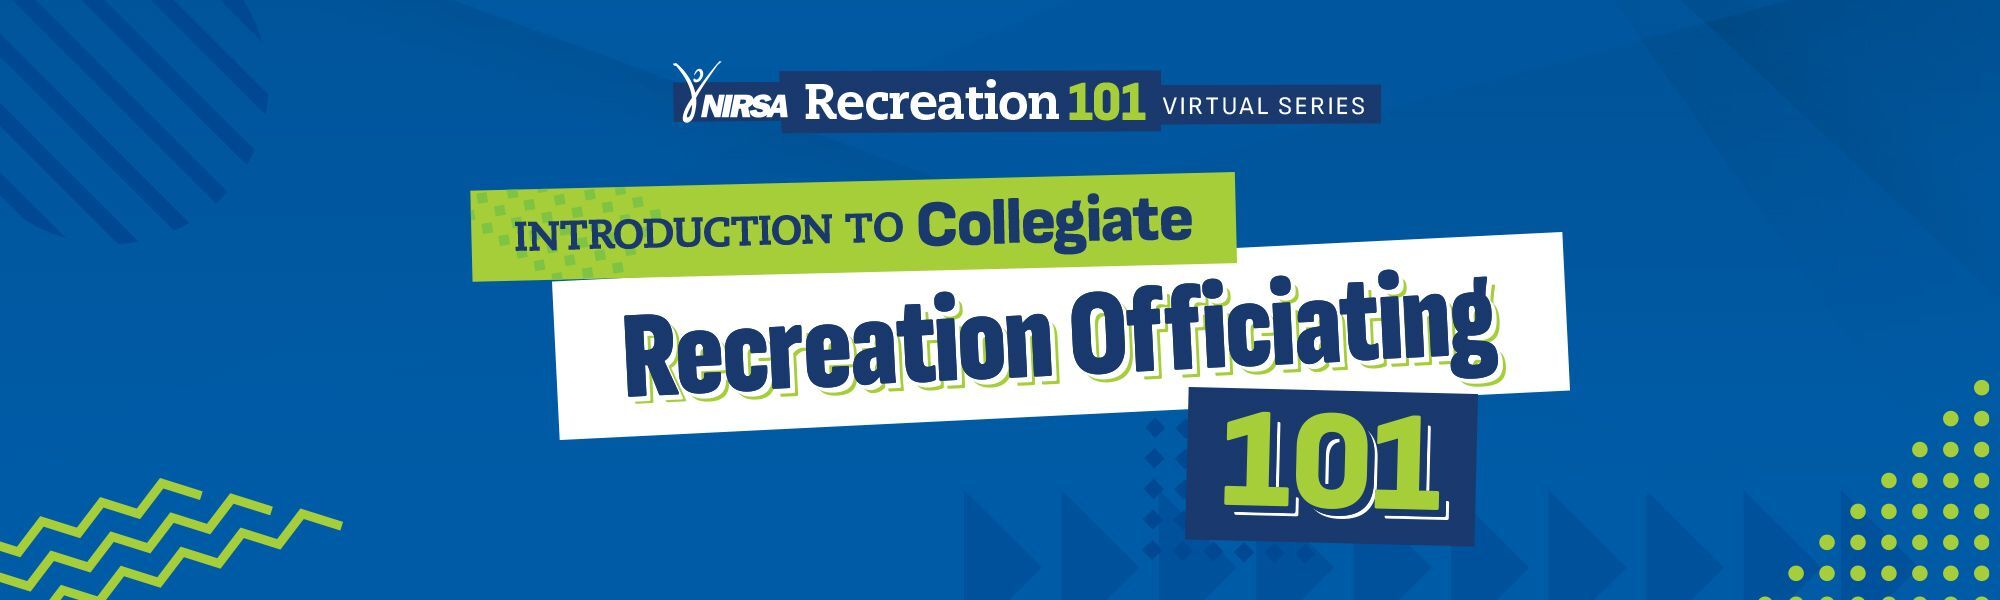 Introduction to Collegiate Recreation Officiating 101